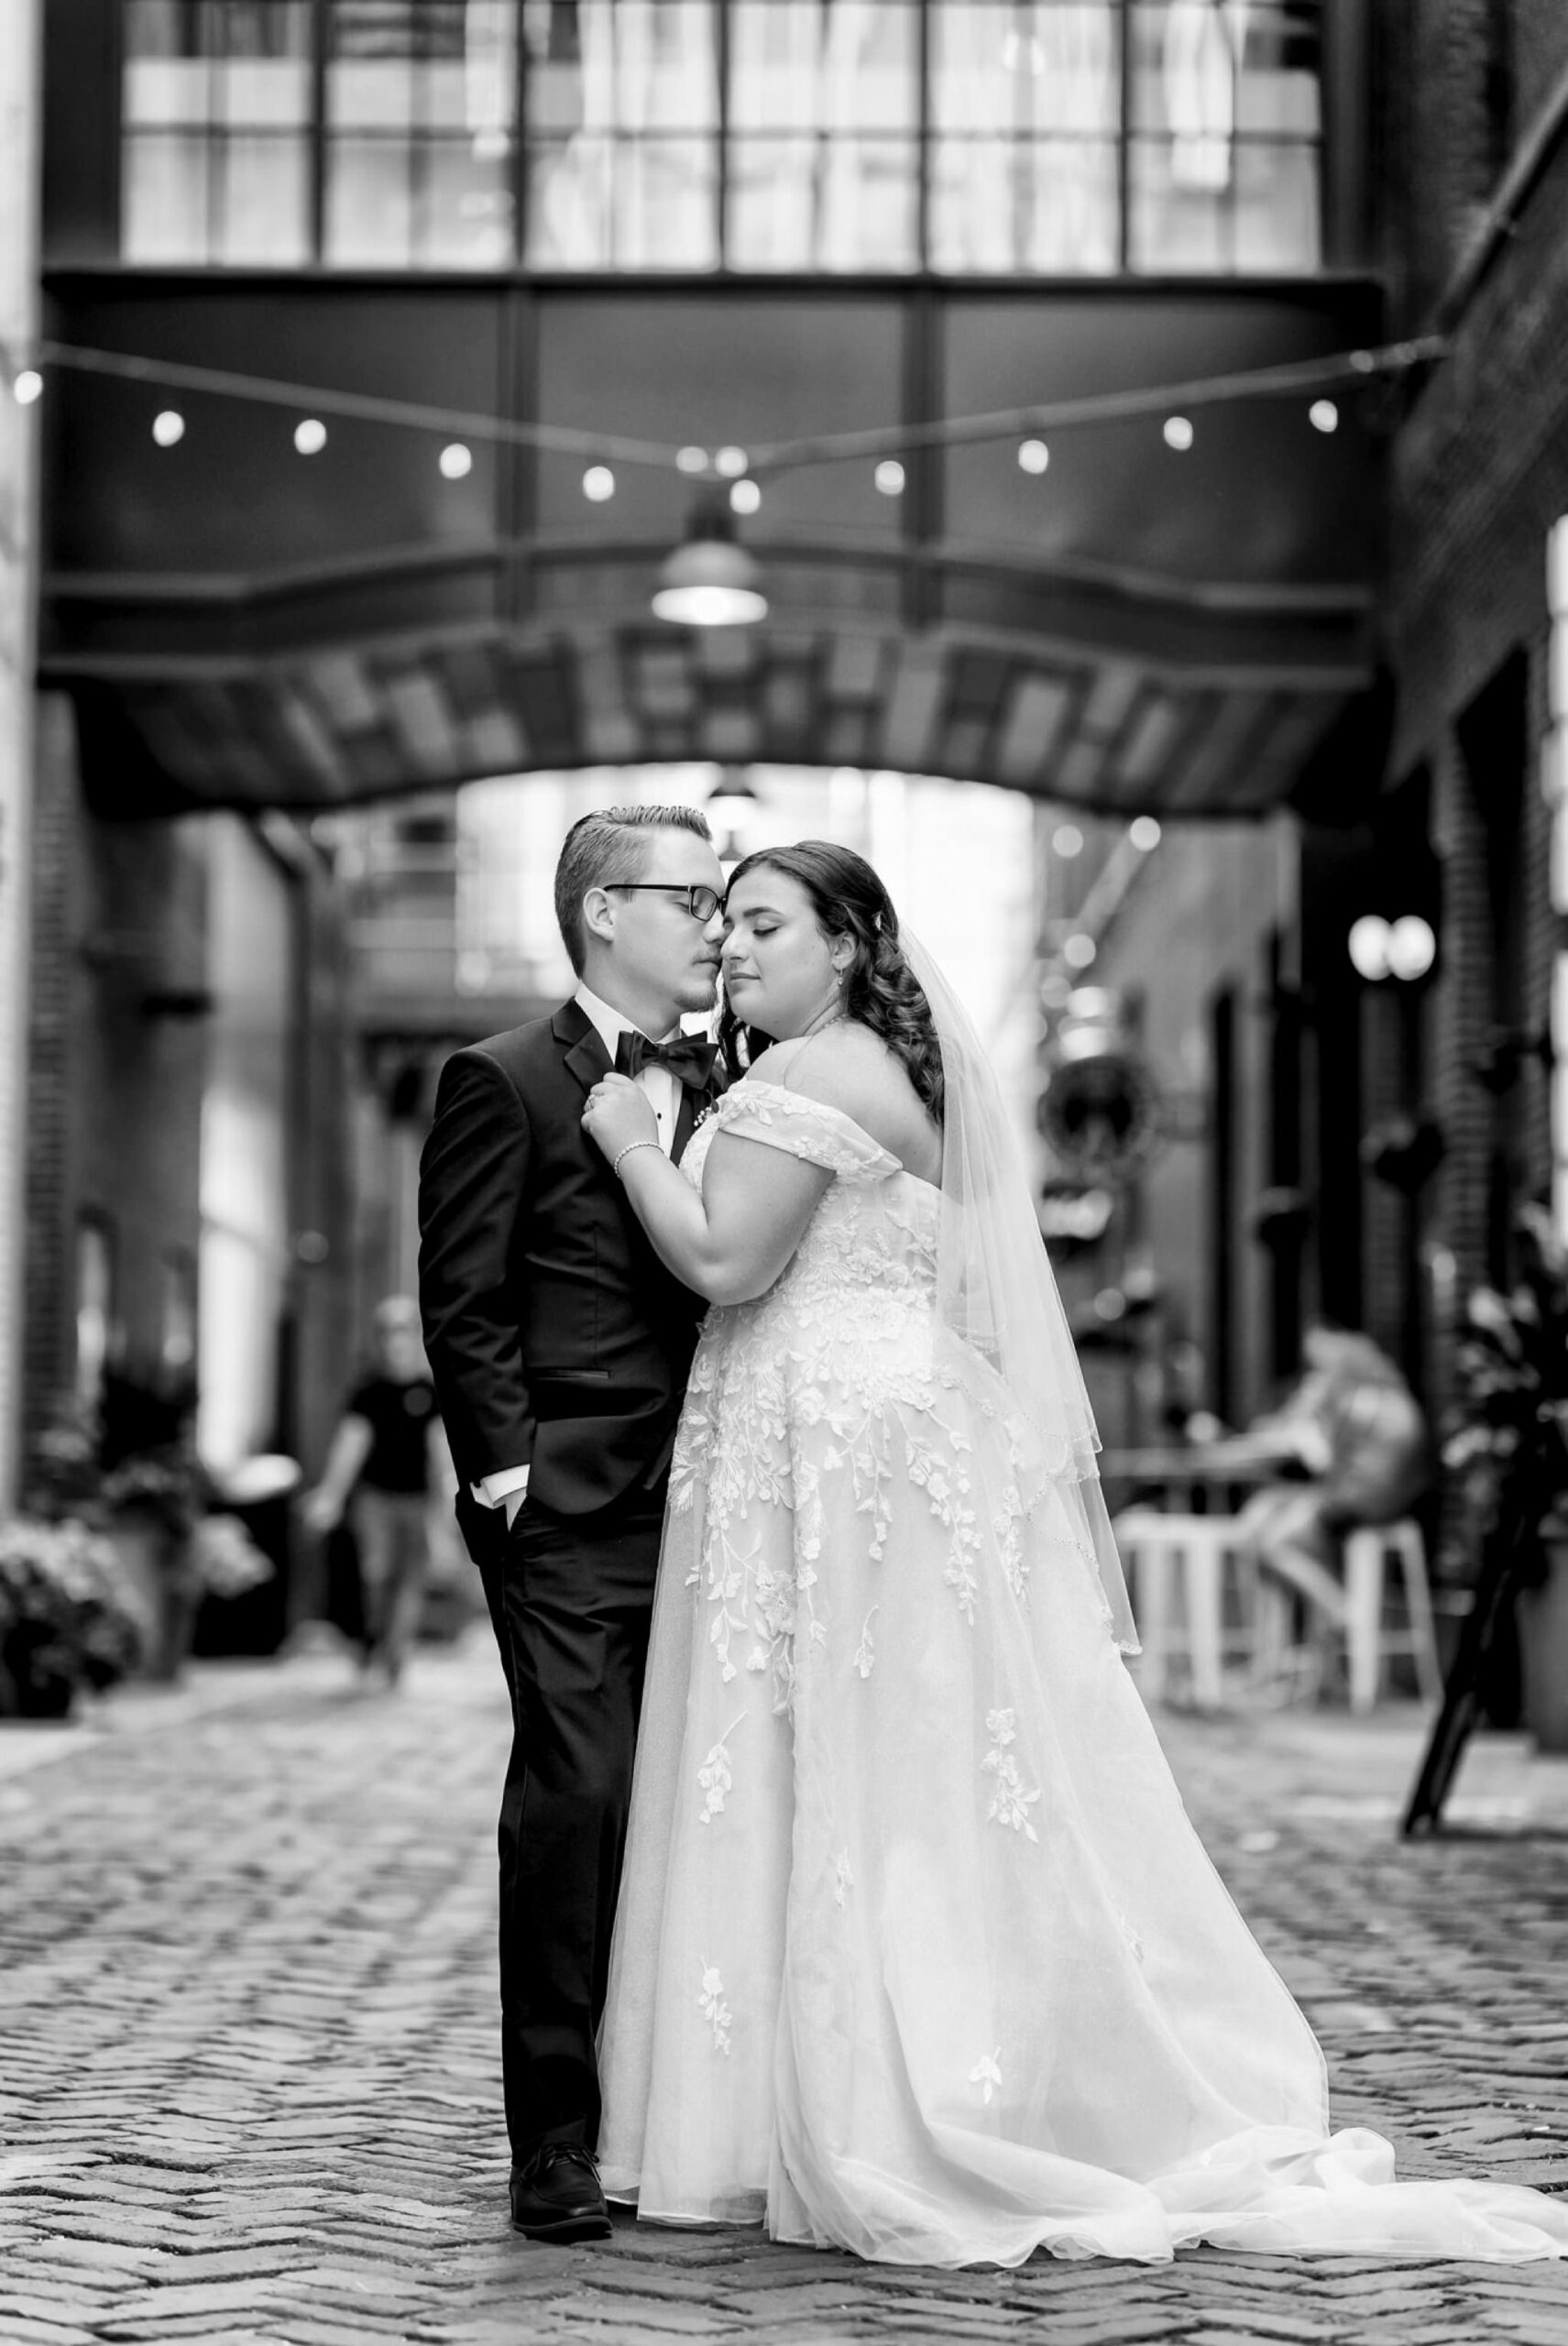 A couple poses and almosts kisses in Parker's Alley on their wedding day.  